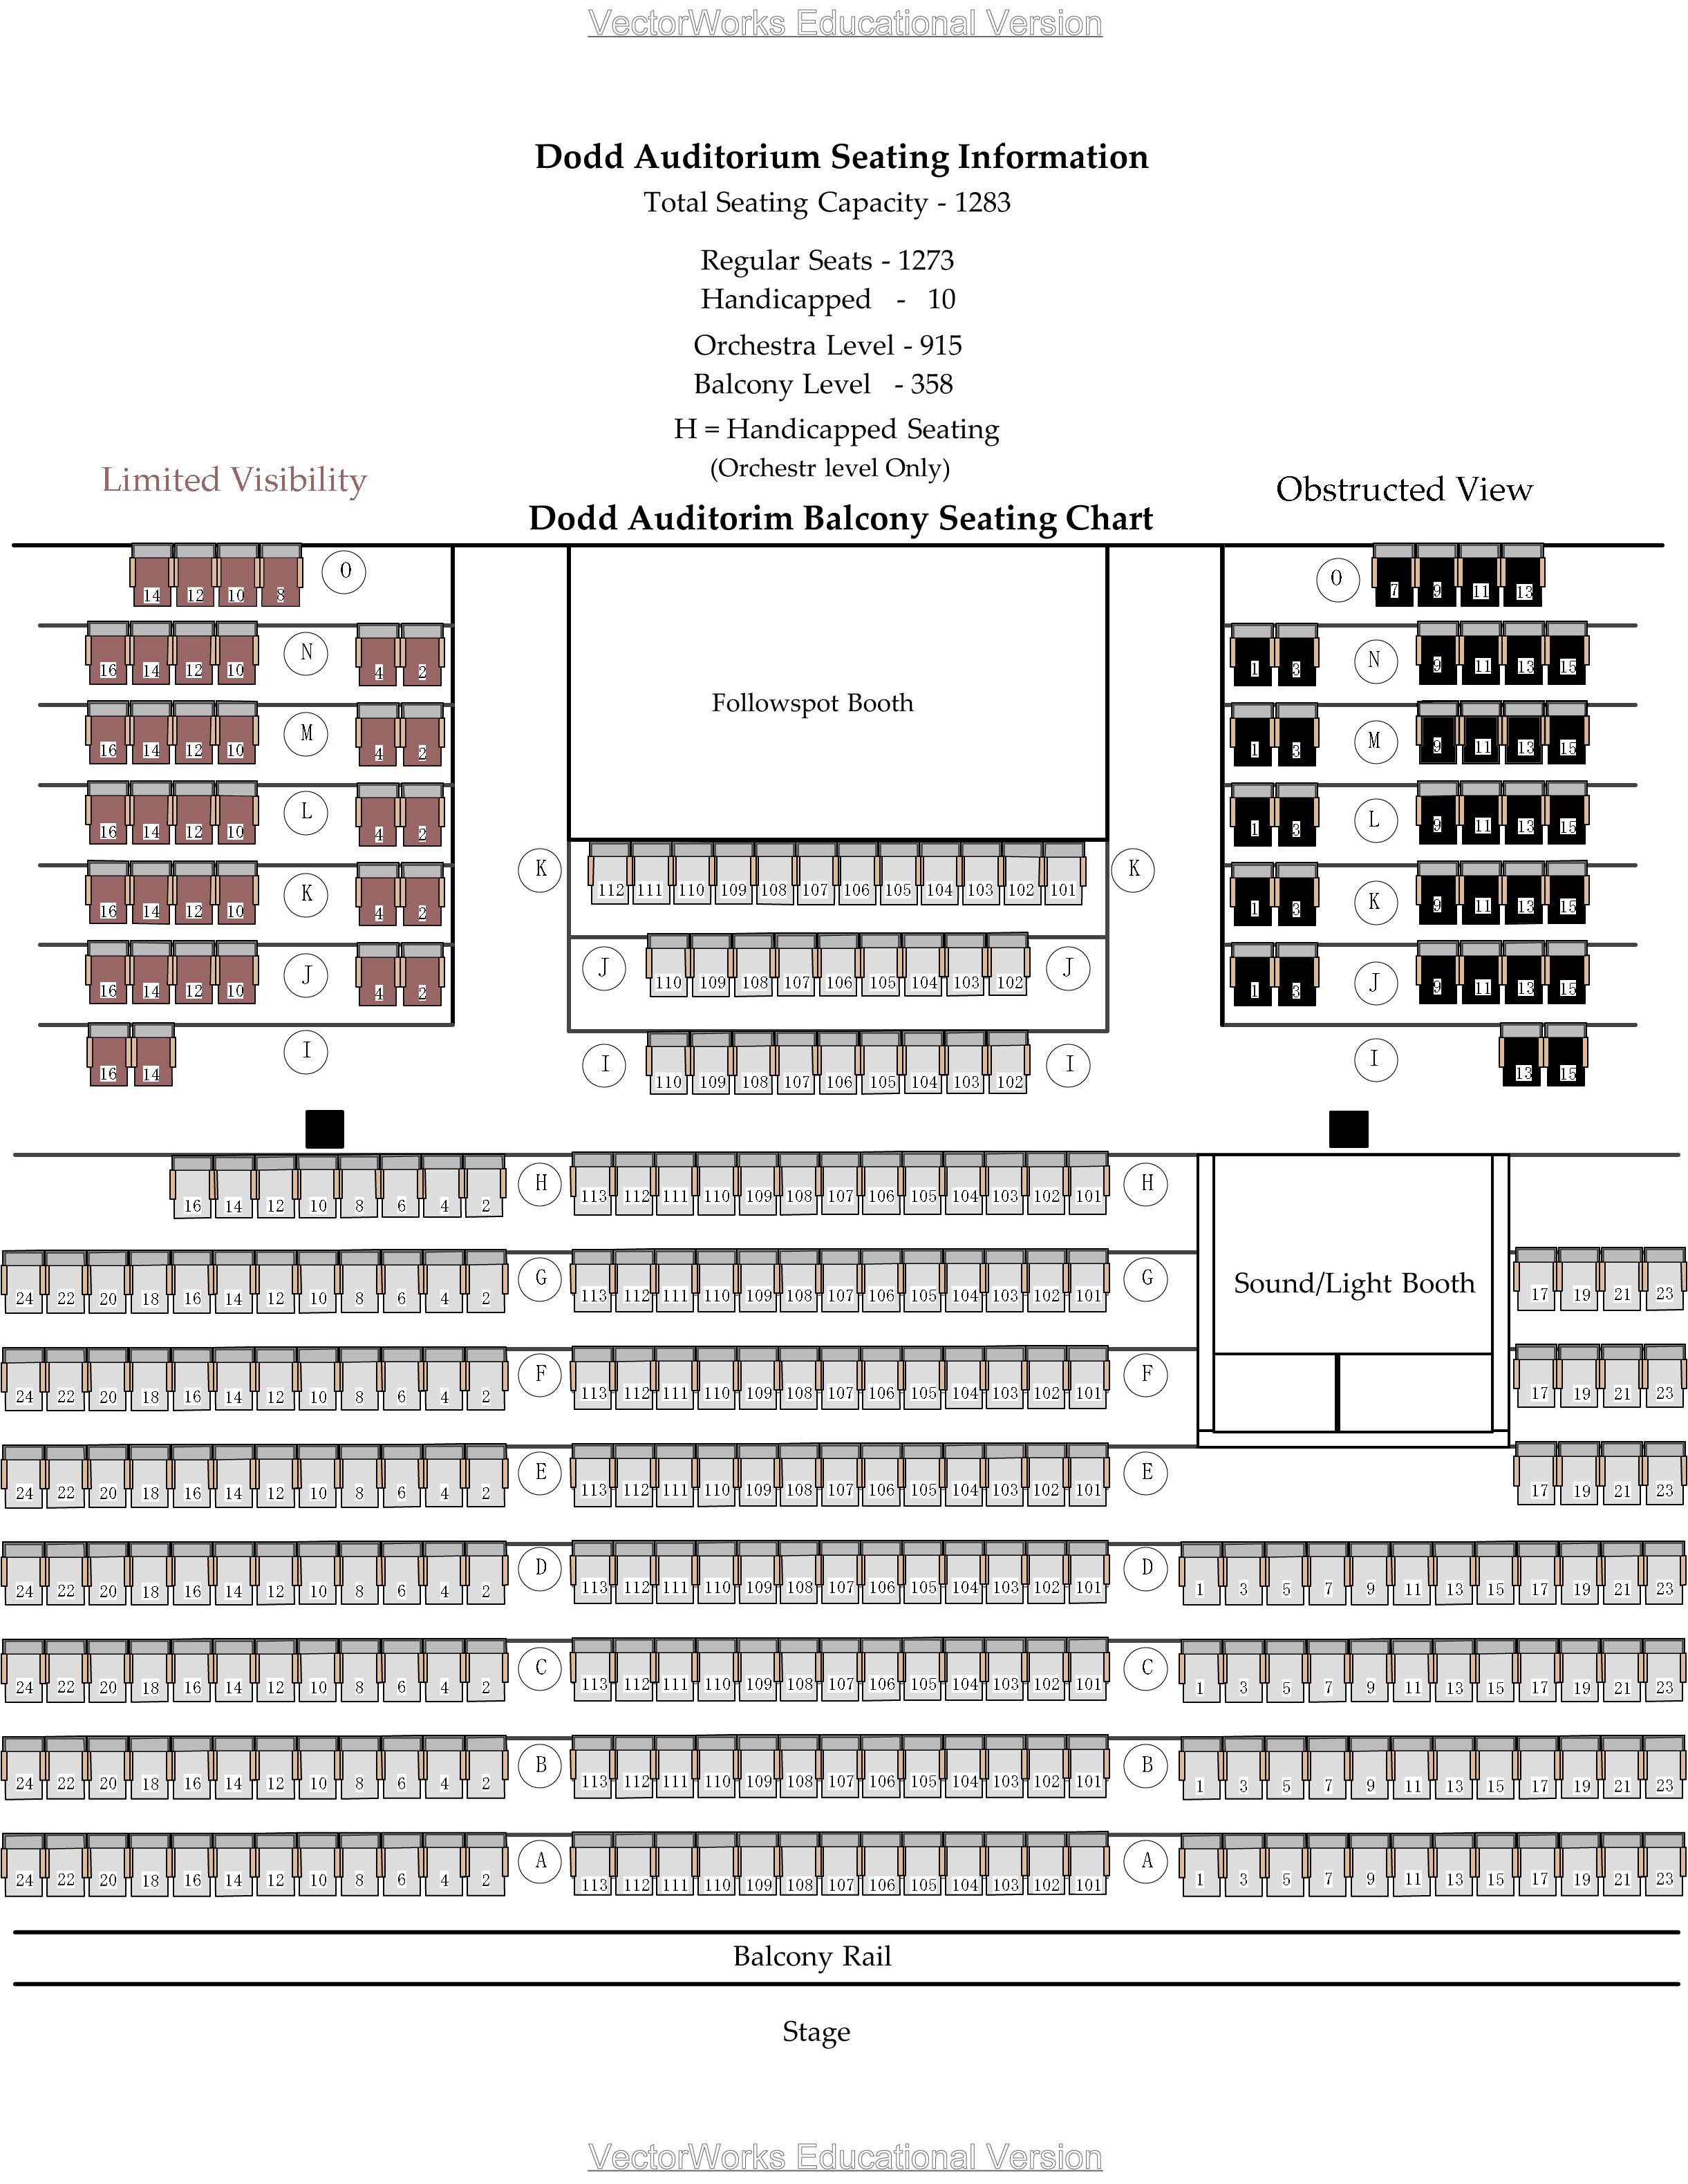 Seating Chart For The Anthem Dc